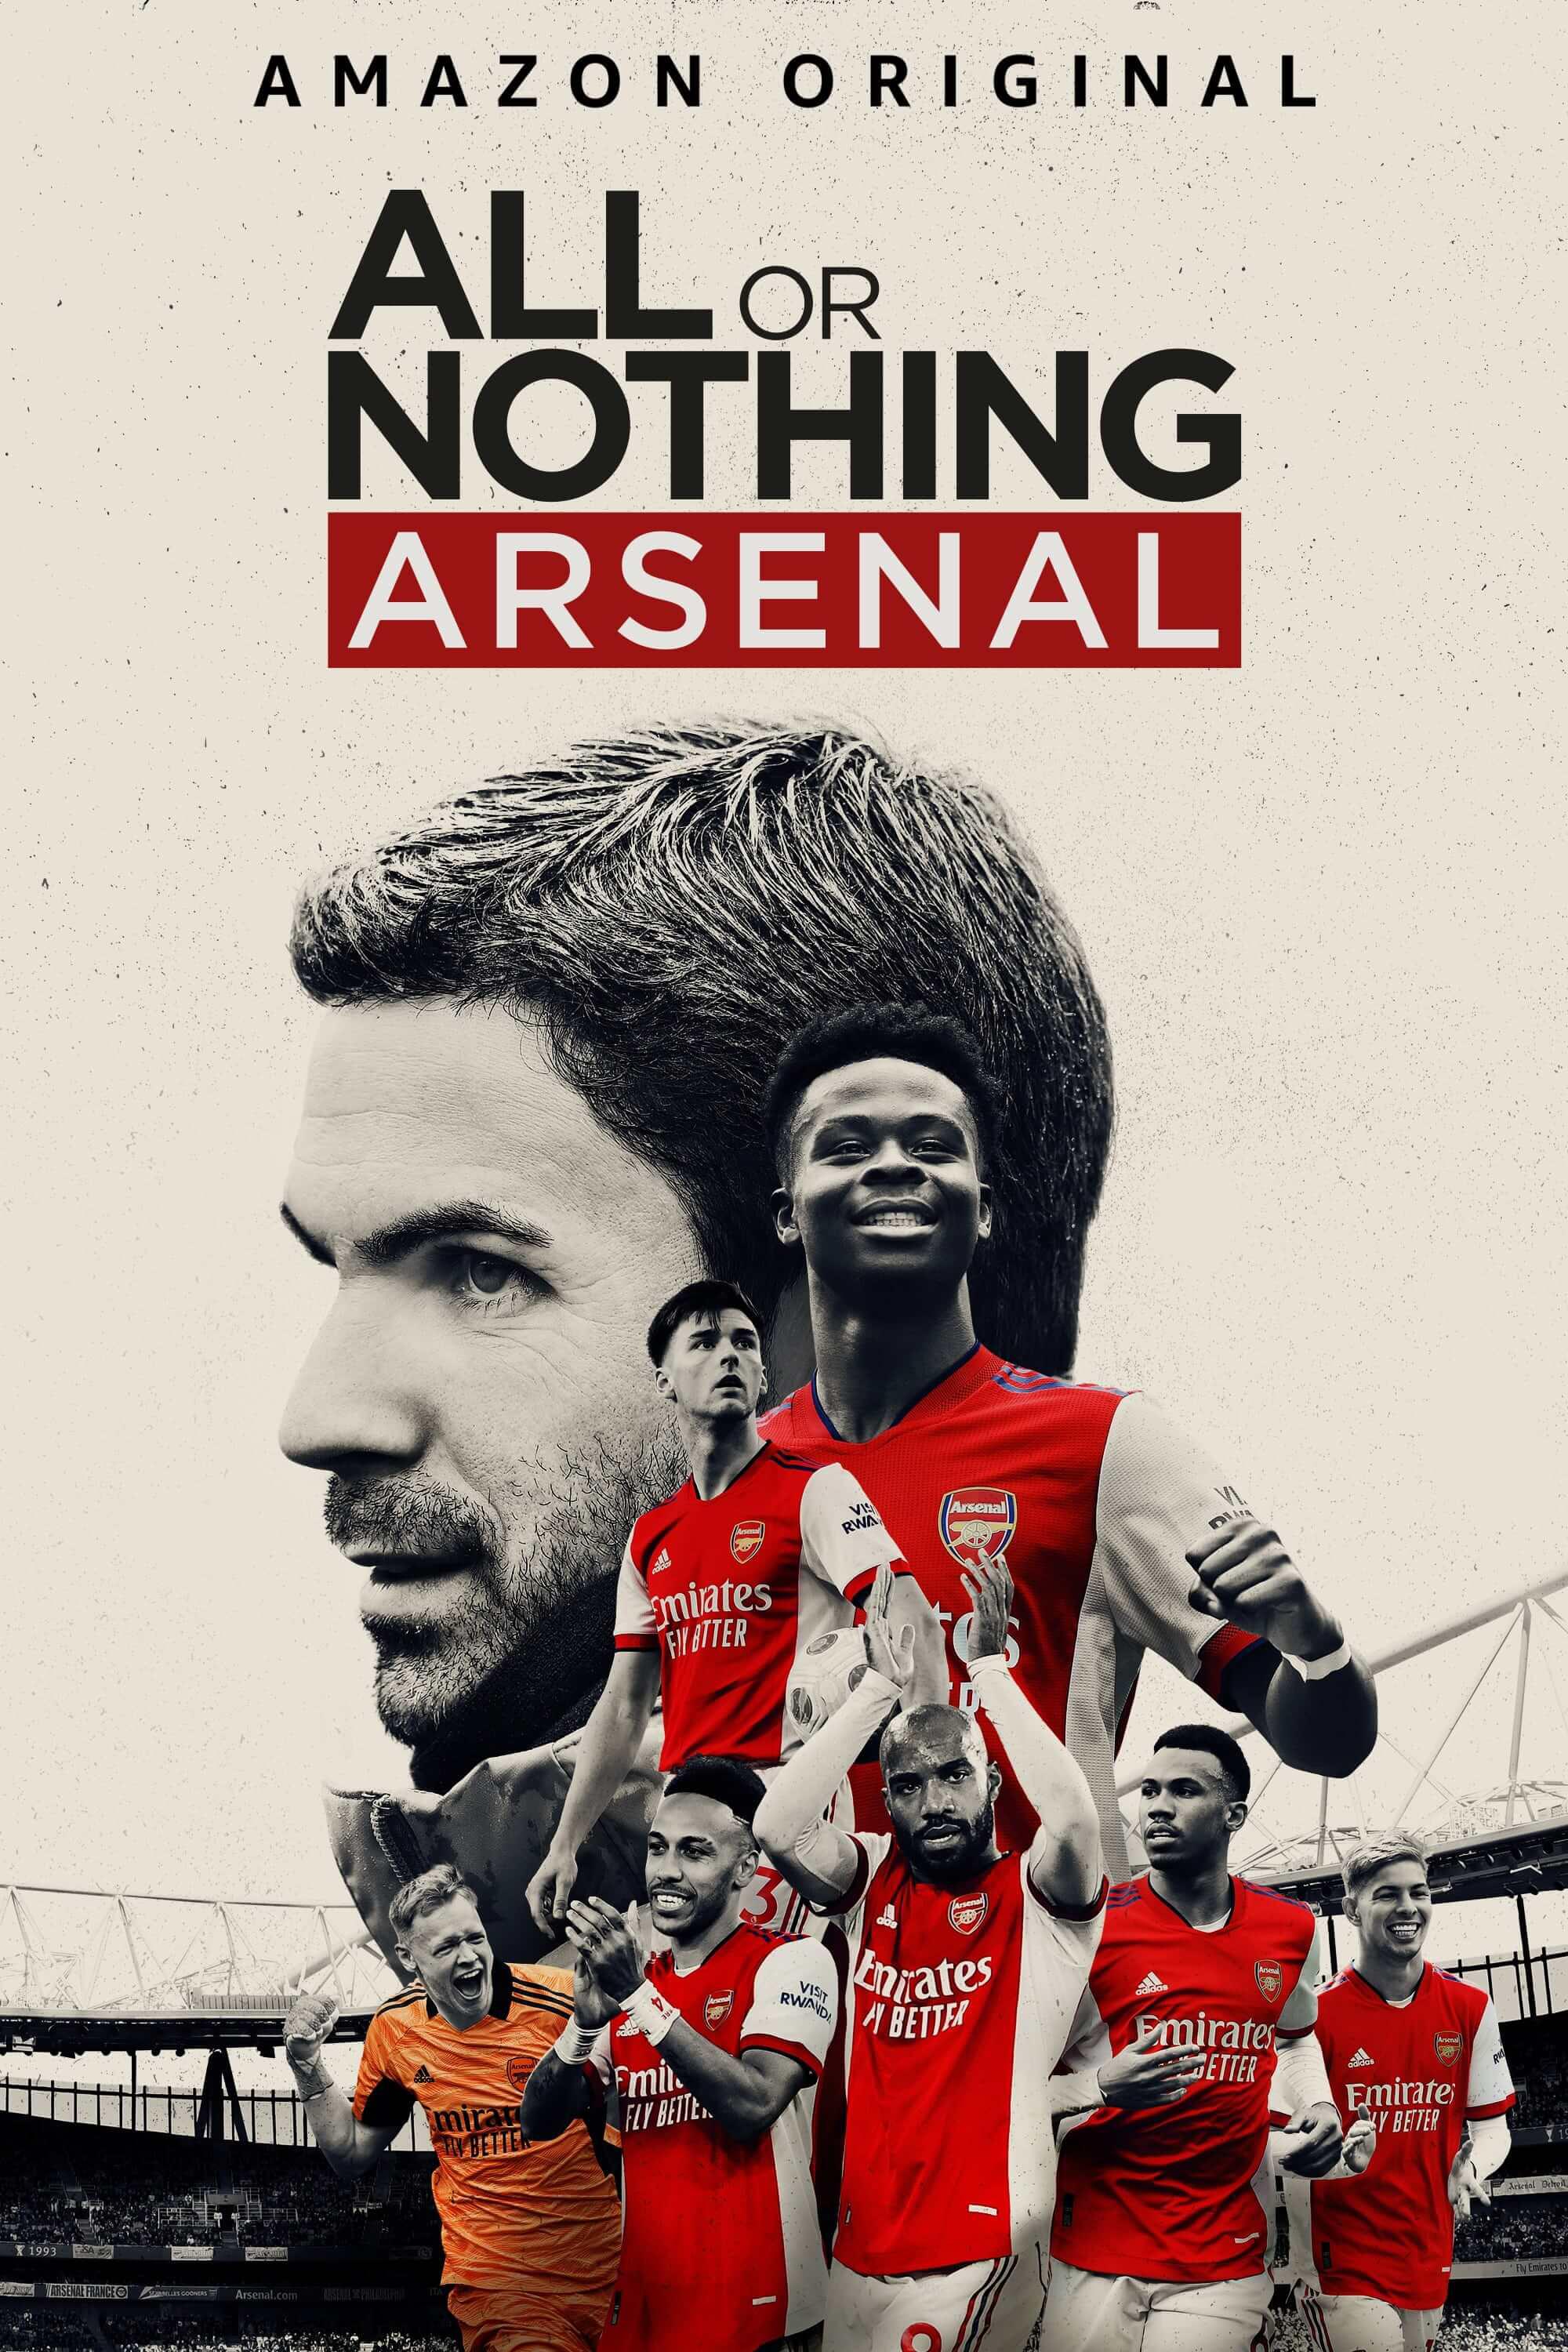 TV ratings for All Or Nothing: Arsenal in the United States. Amazon Prime Video TV series